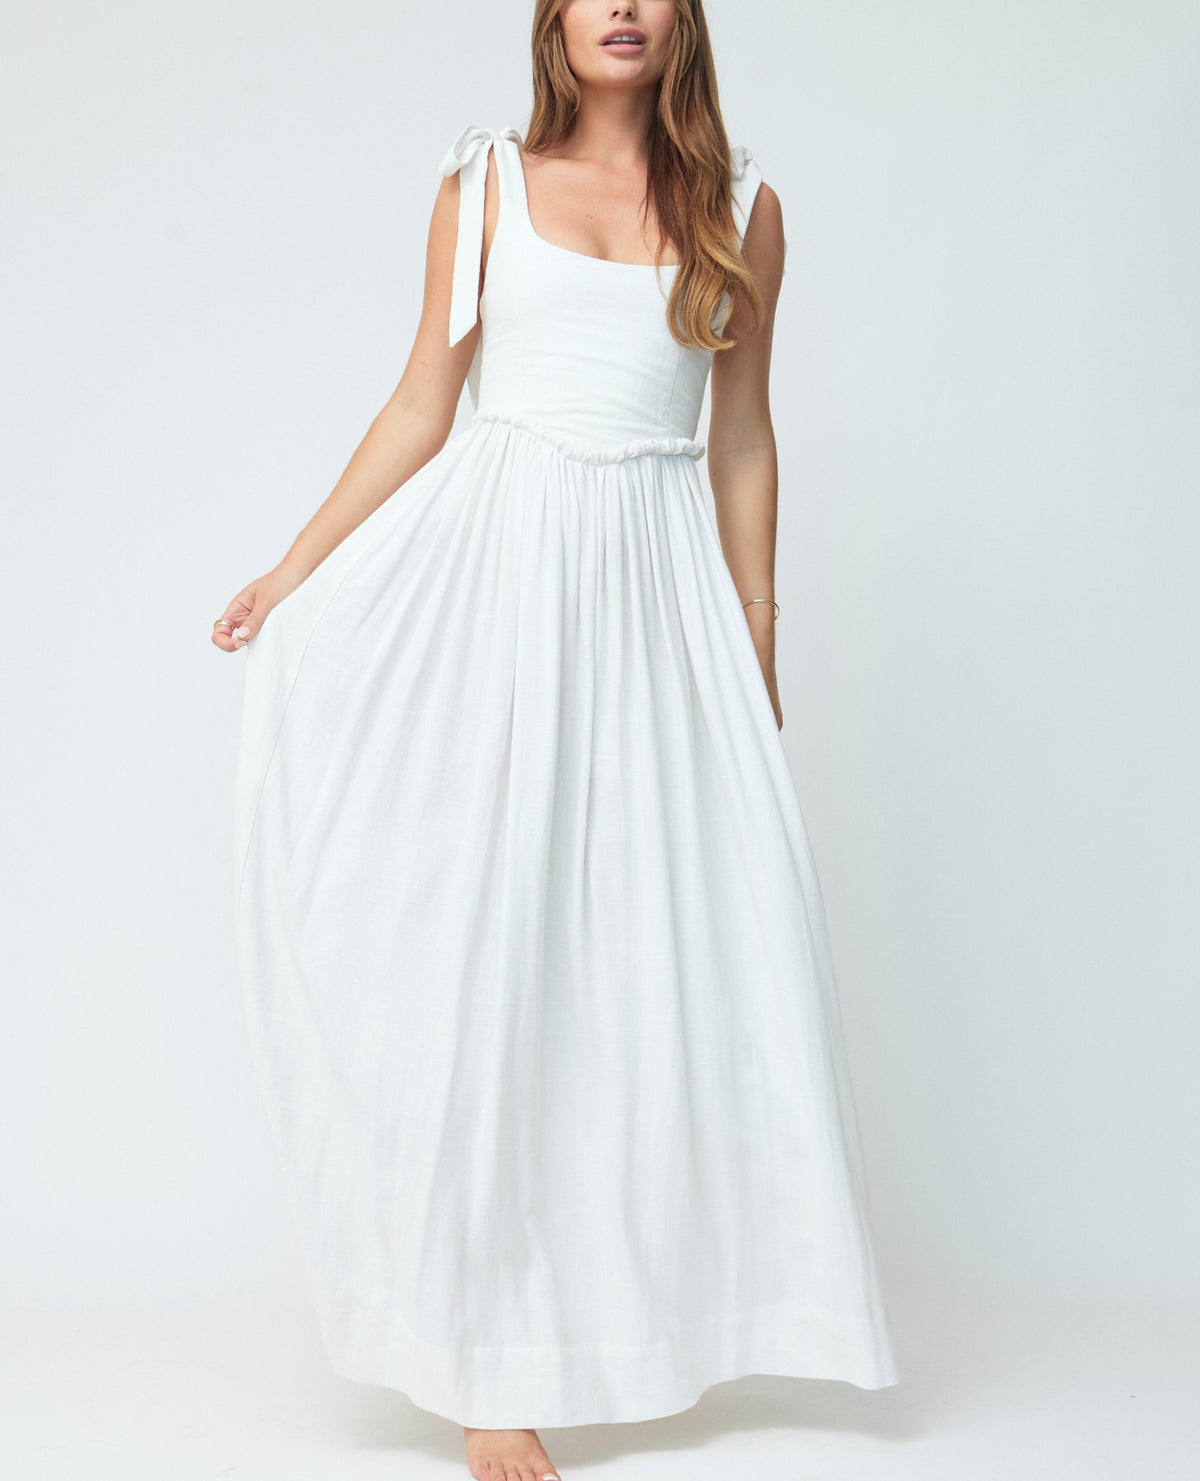 The Marie Dress in White